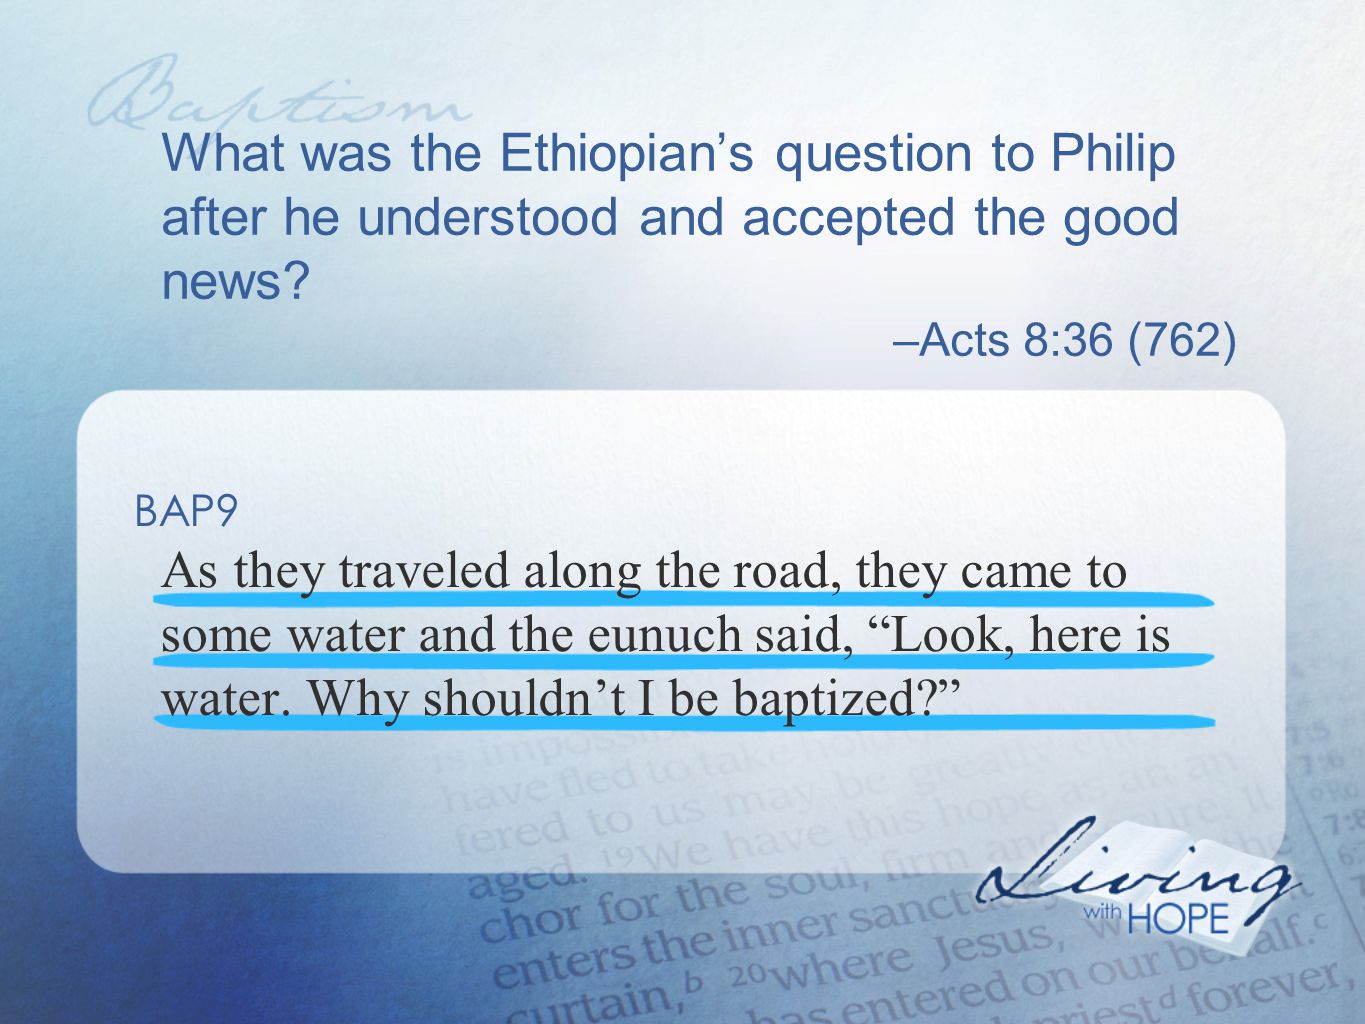 What was the Ethiopian’s question to Philip after he understood and accepted the good news.